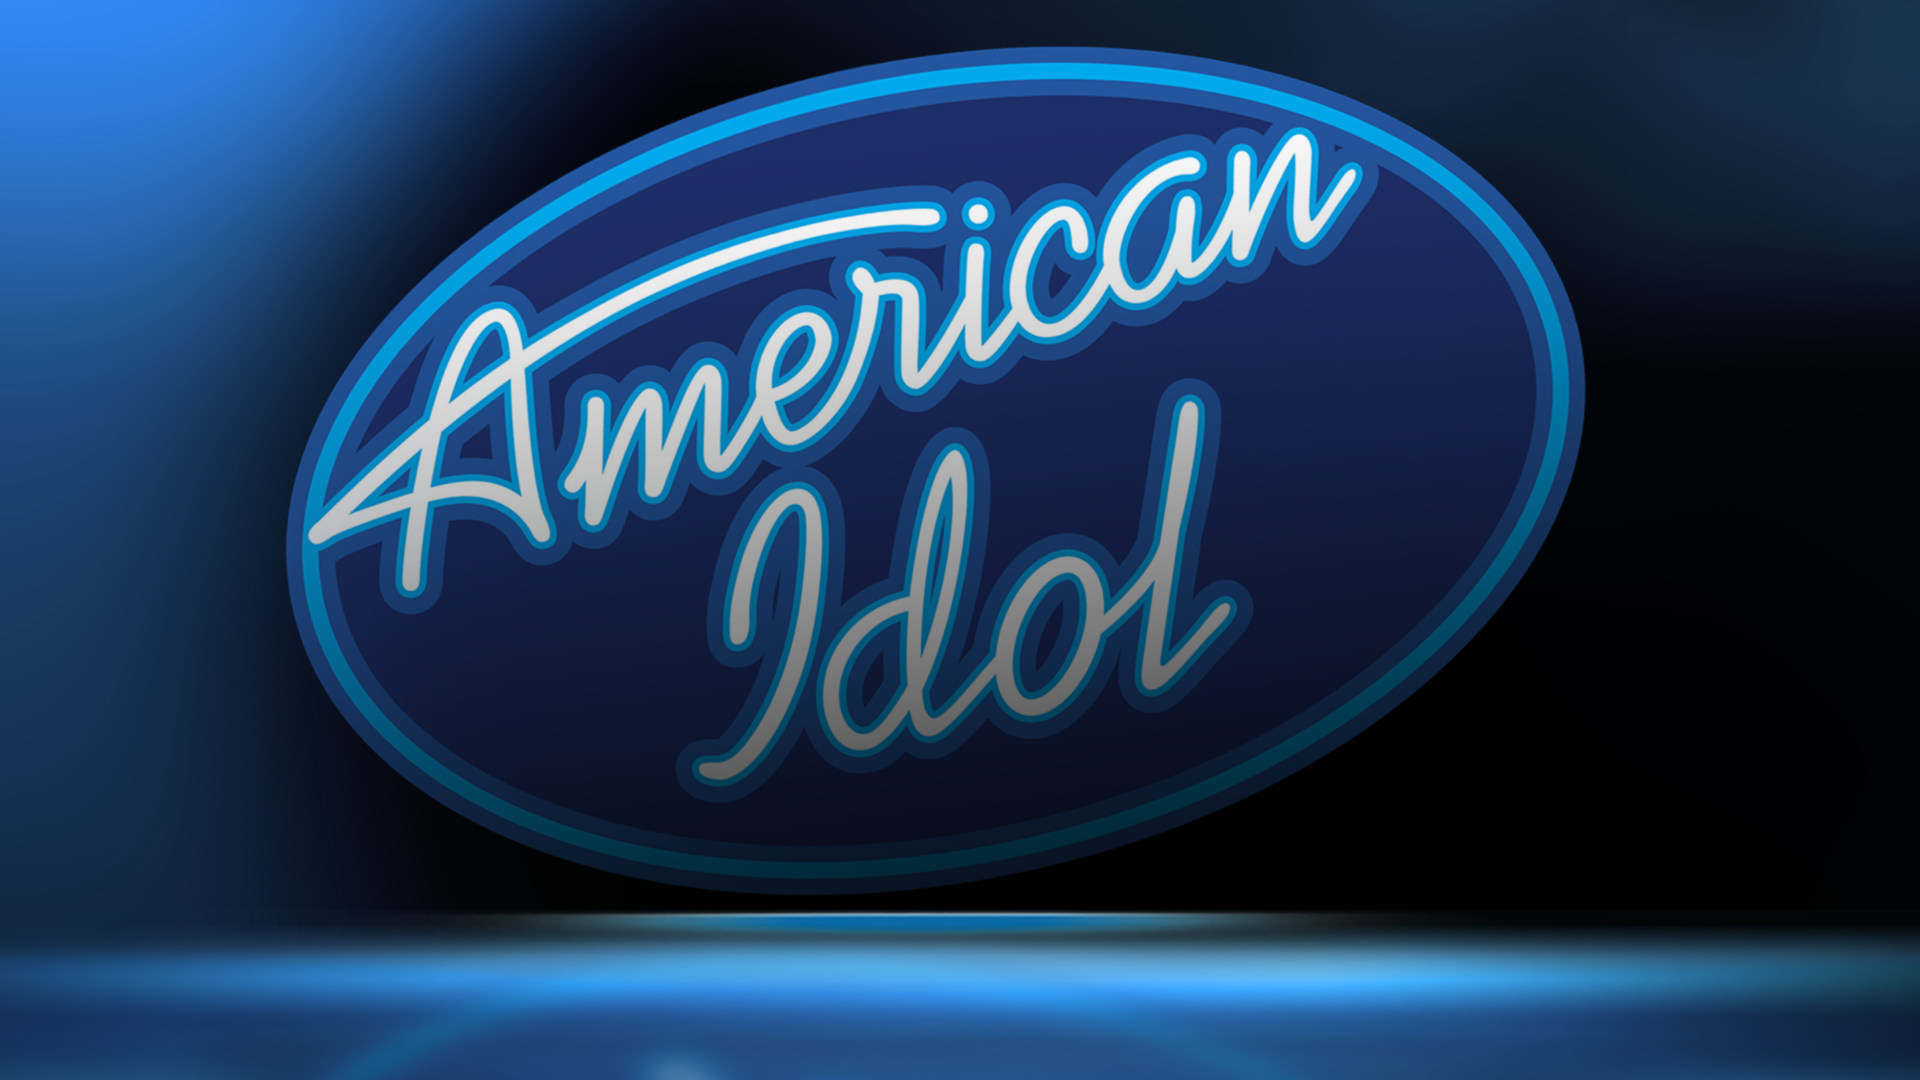 American Idol came to Waco in search of the country's next superstar.